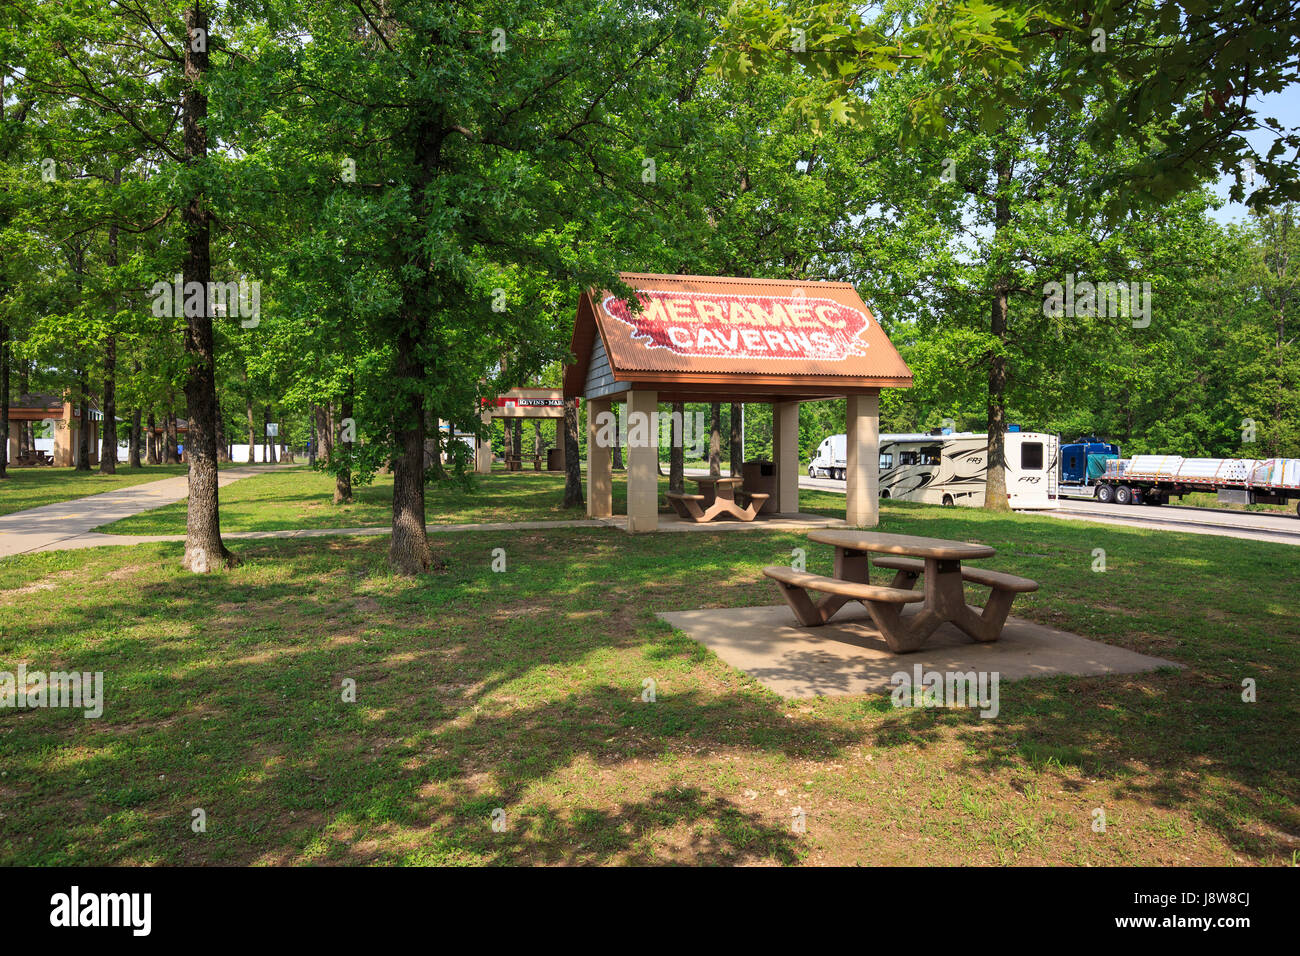 Picnic bench shelter in the shape of a structure you might see along Route 66 in Missouri Stock Photo